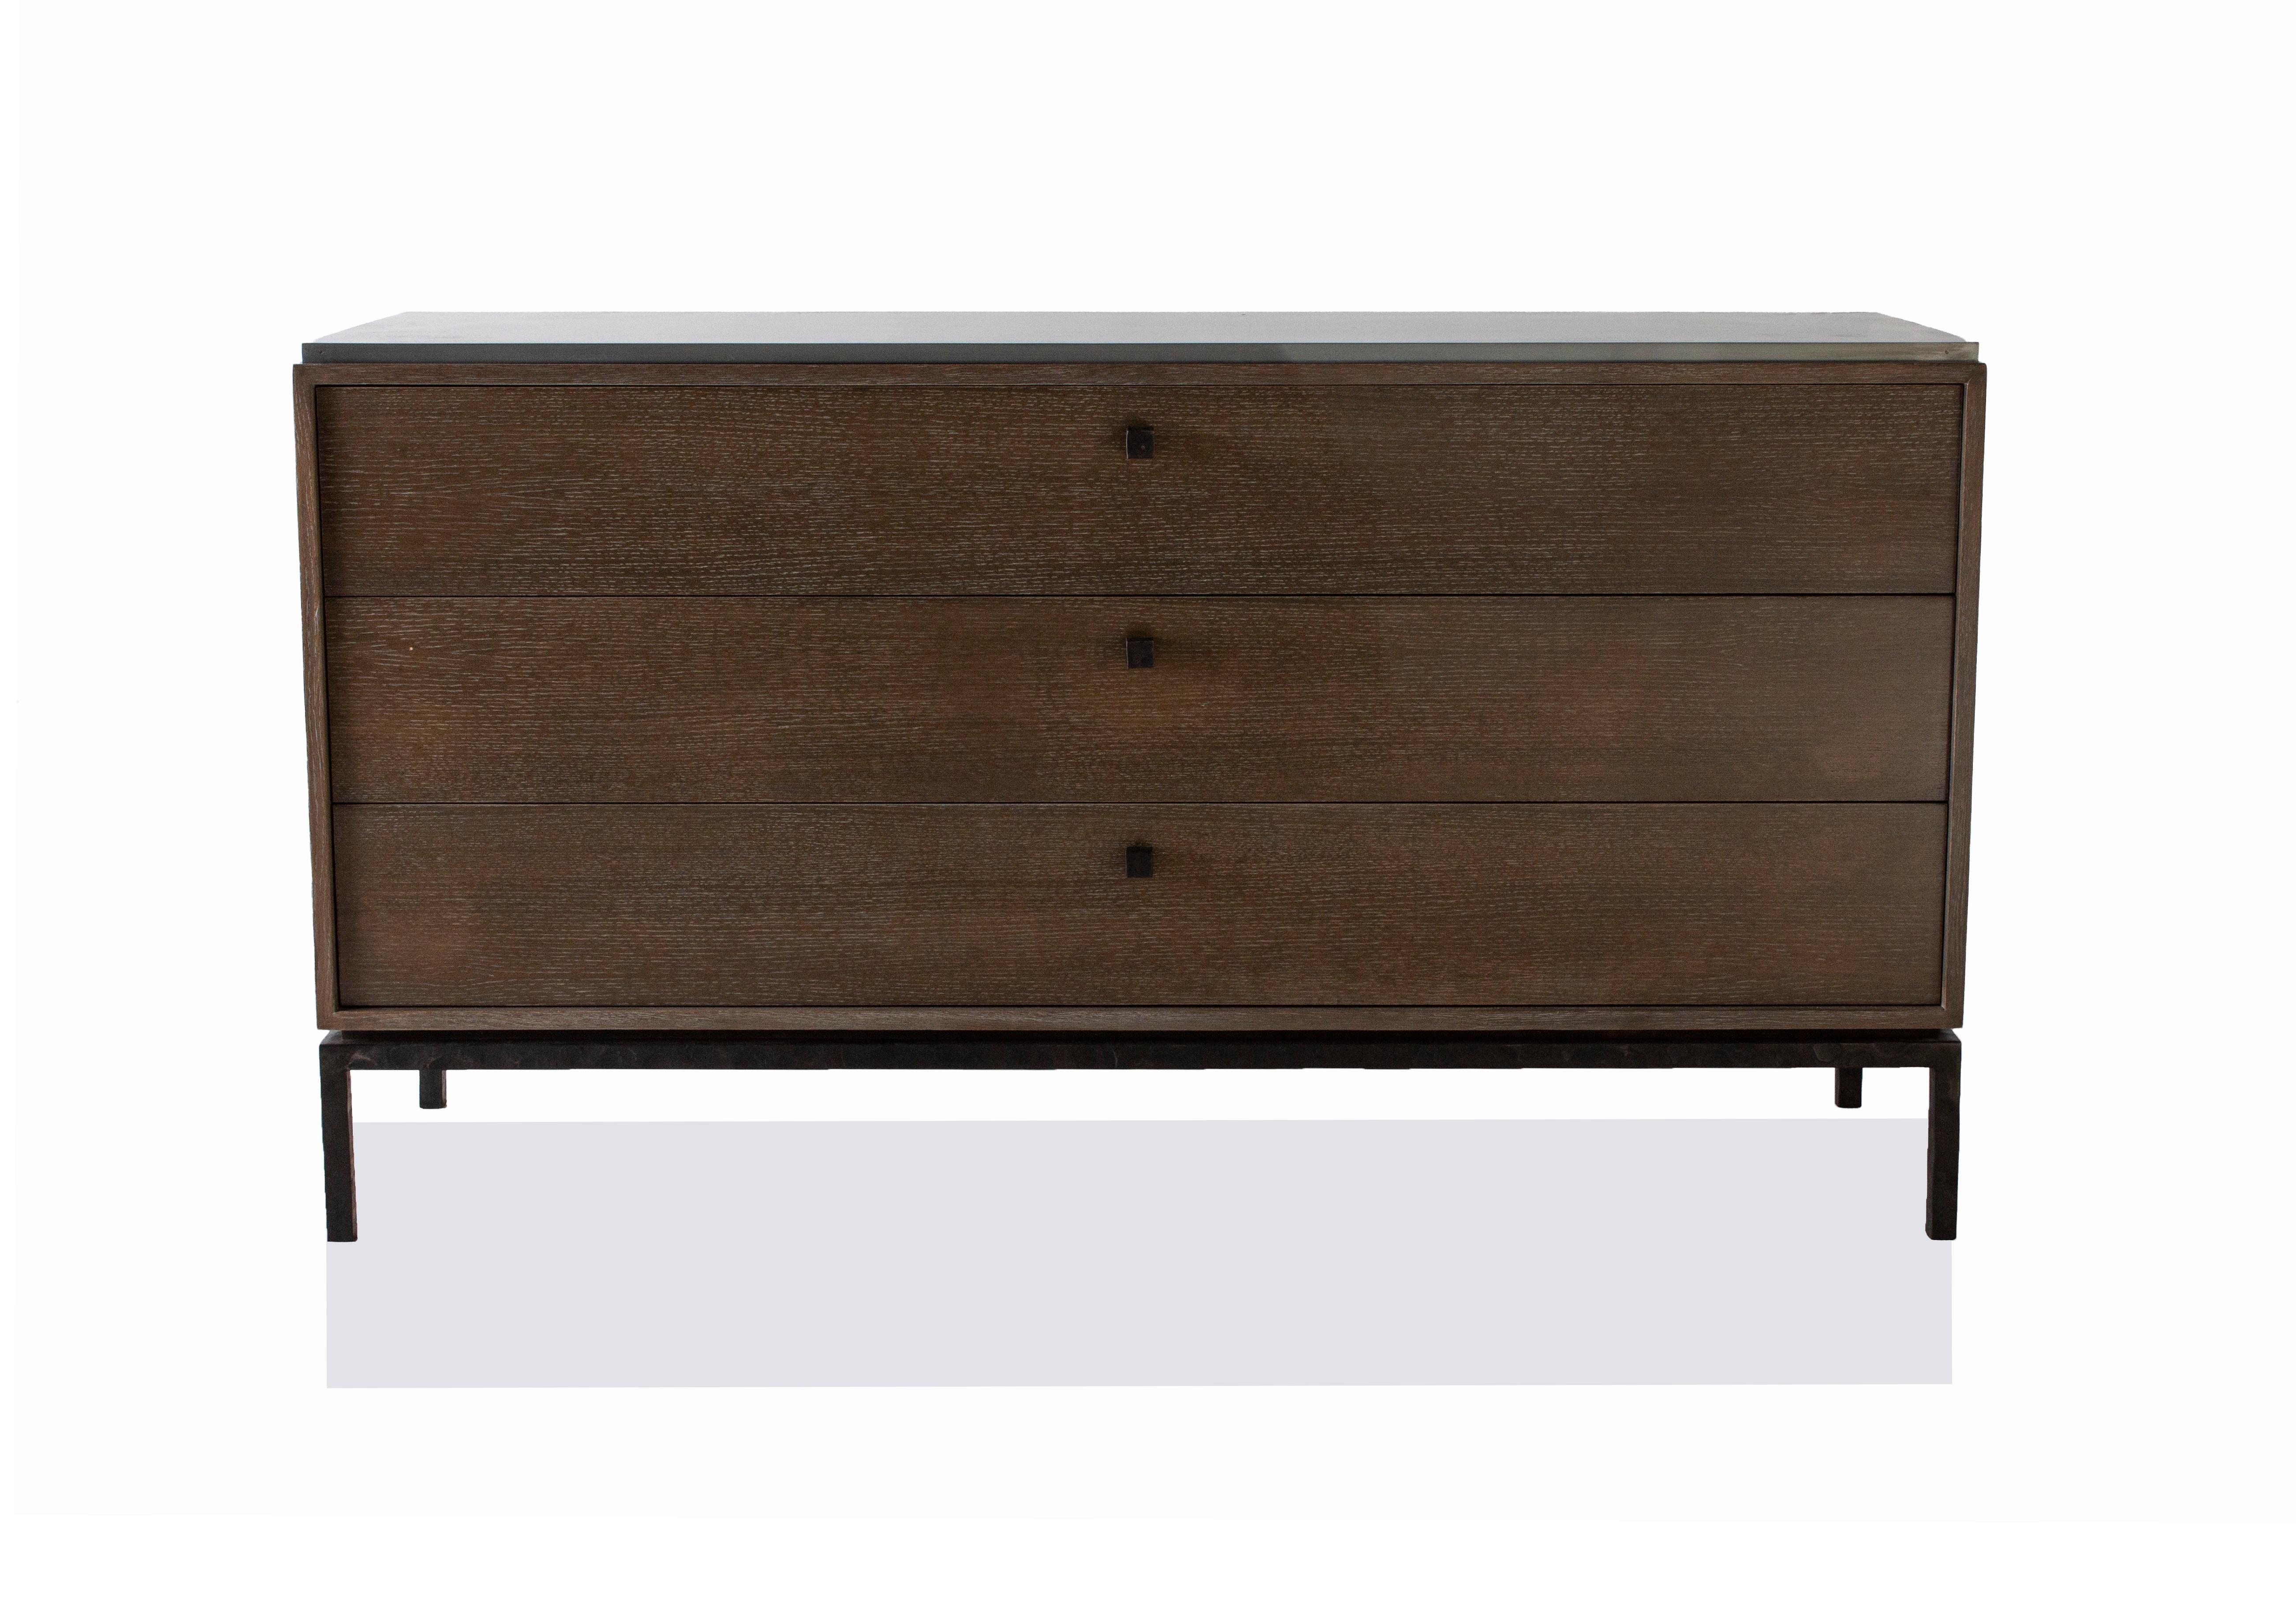 Custom made chest of drawers with three drawers. This item can be ordered in custom finishes, wood types and dimensions.

Wood: Oak Bali finish
Metal: Light hammer ebony
Zinc: Steel finish

Measures: 20